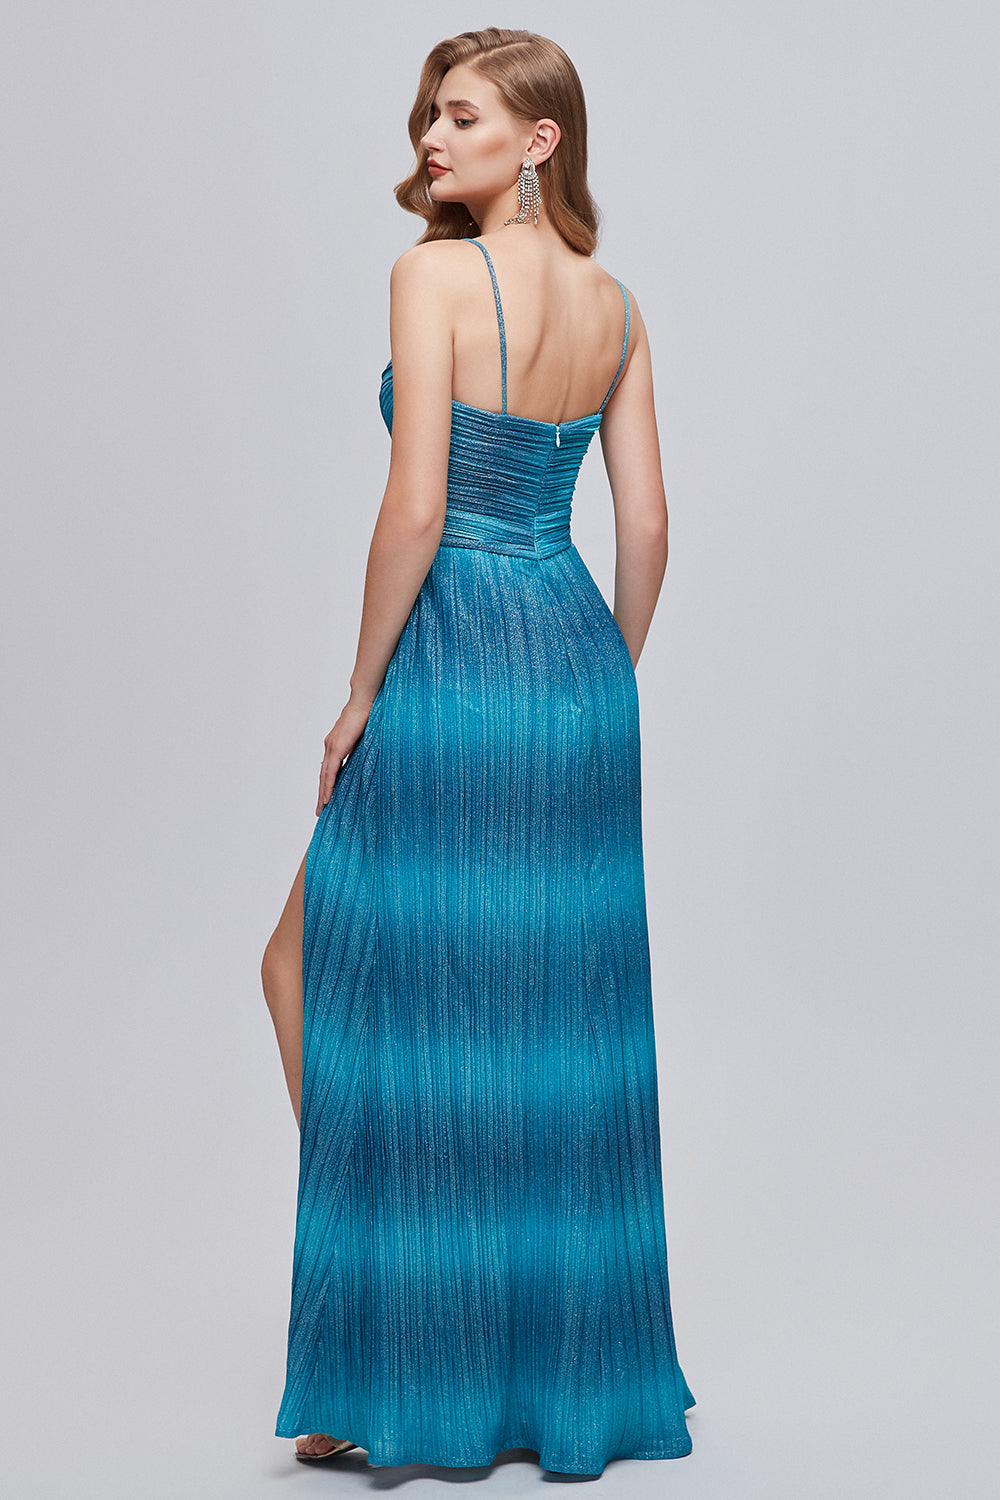 Ombre Blue Spaghetti Straps Ruched Formal Dress with Slit